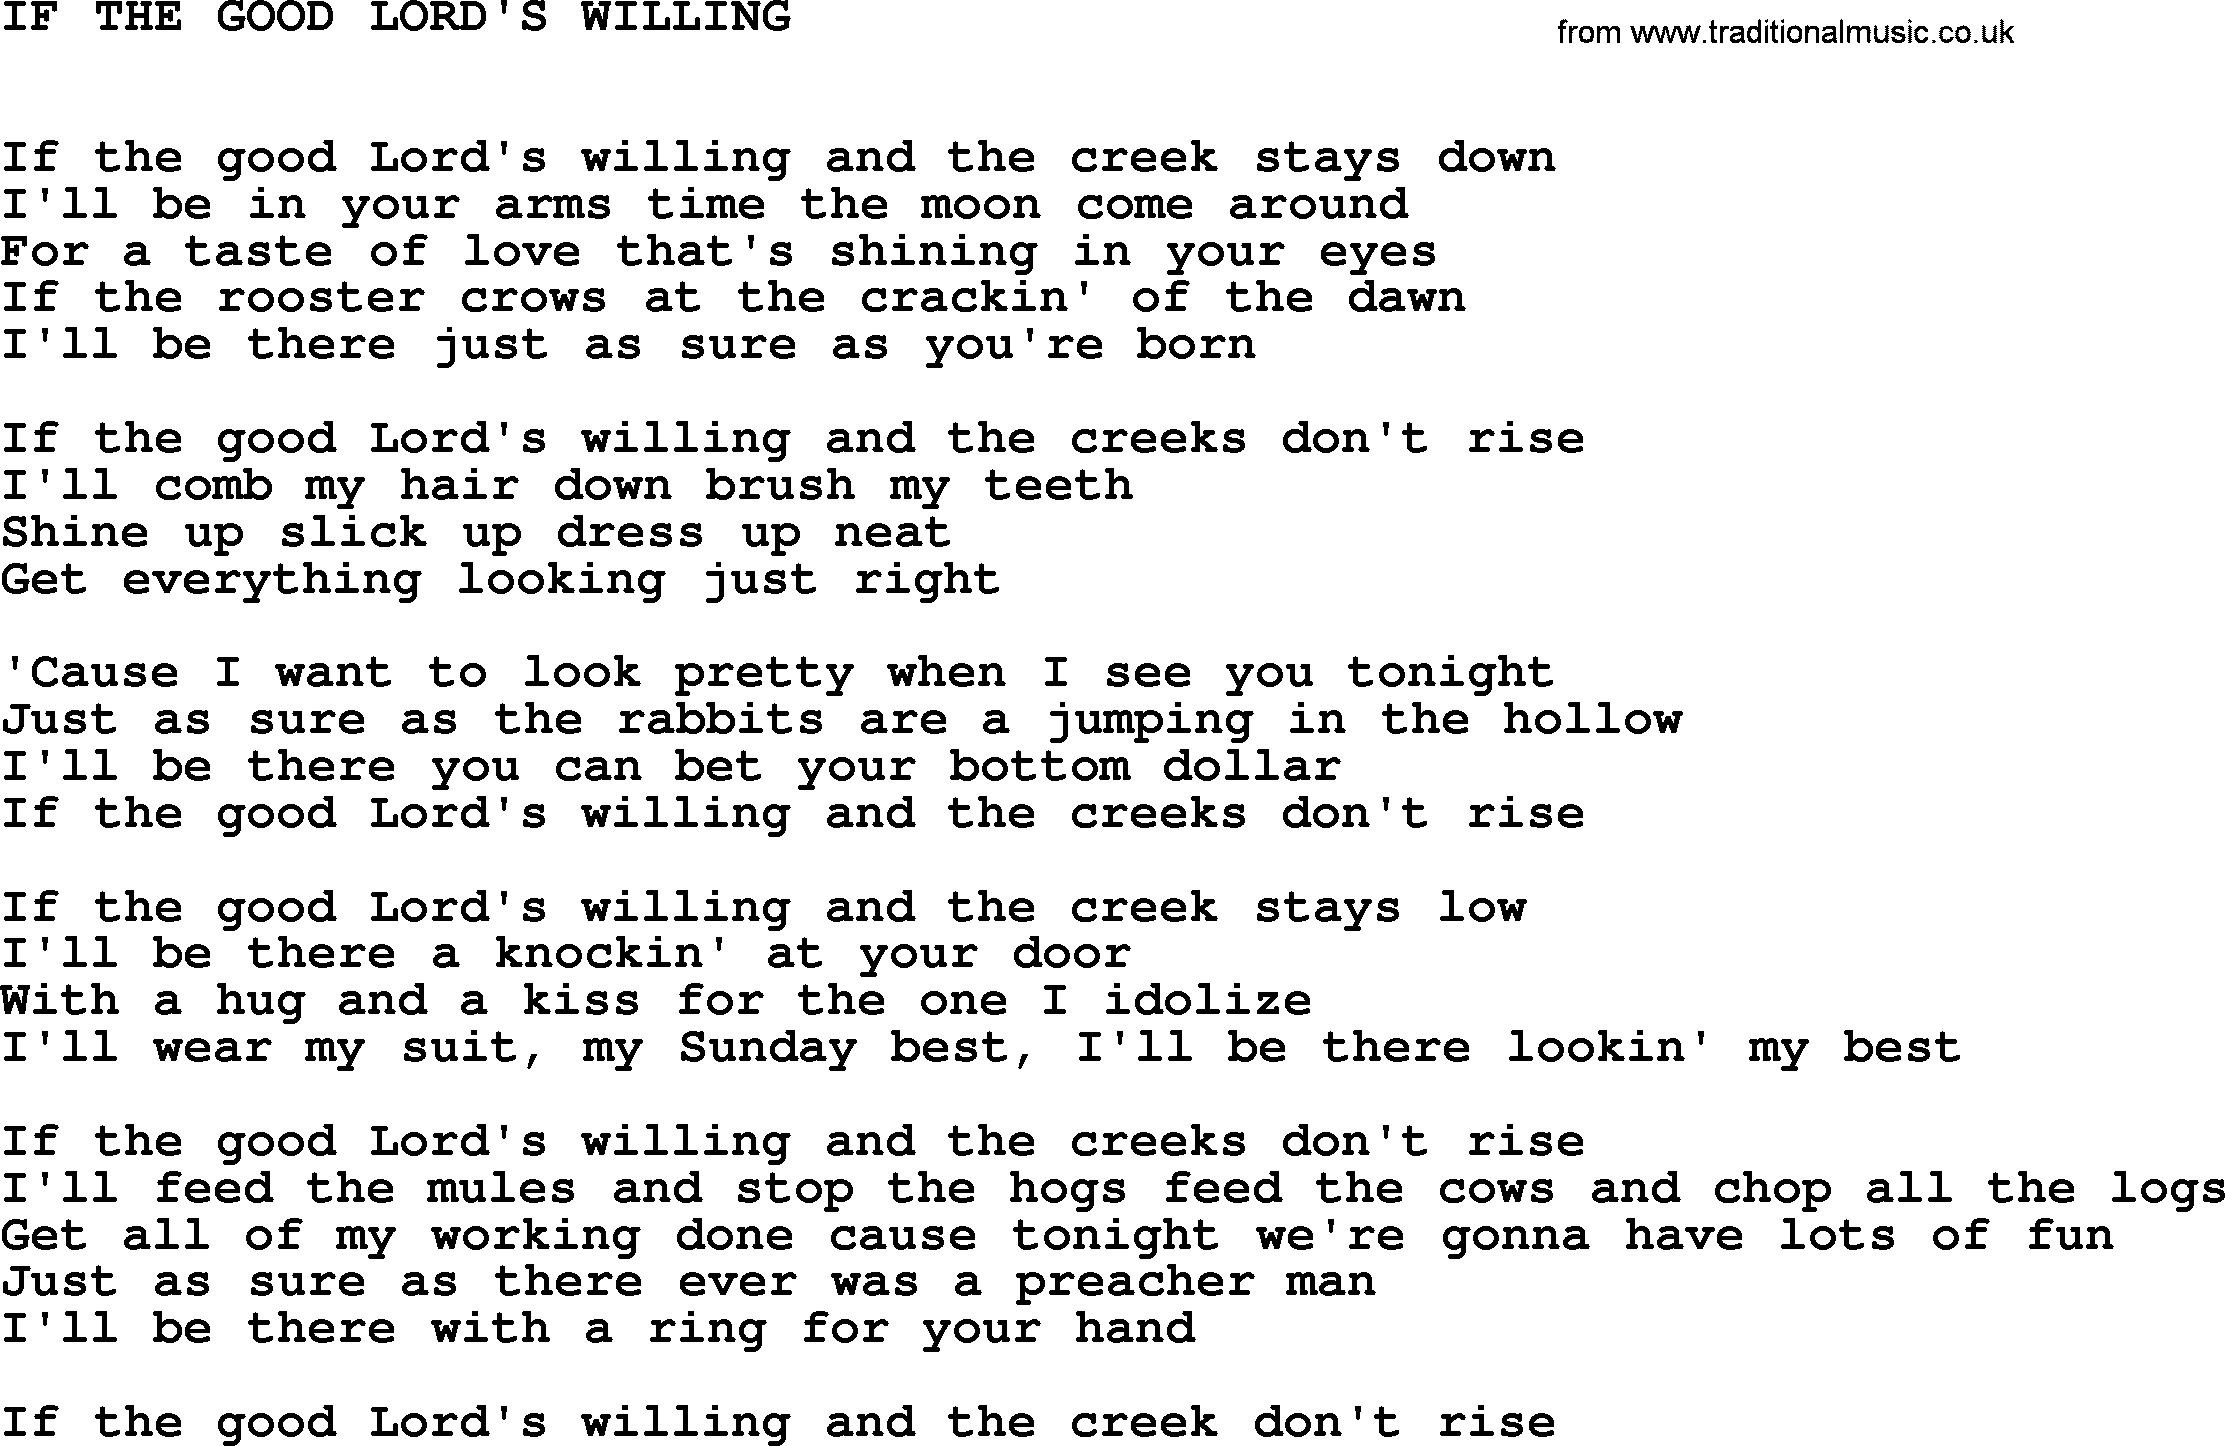 Johnny Cash song If The Good Lord's Willing.txt lyrics